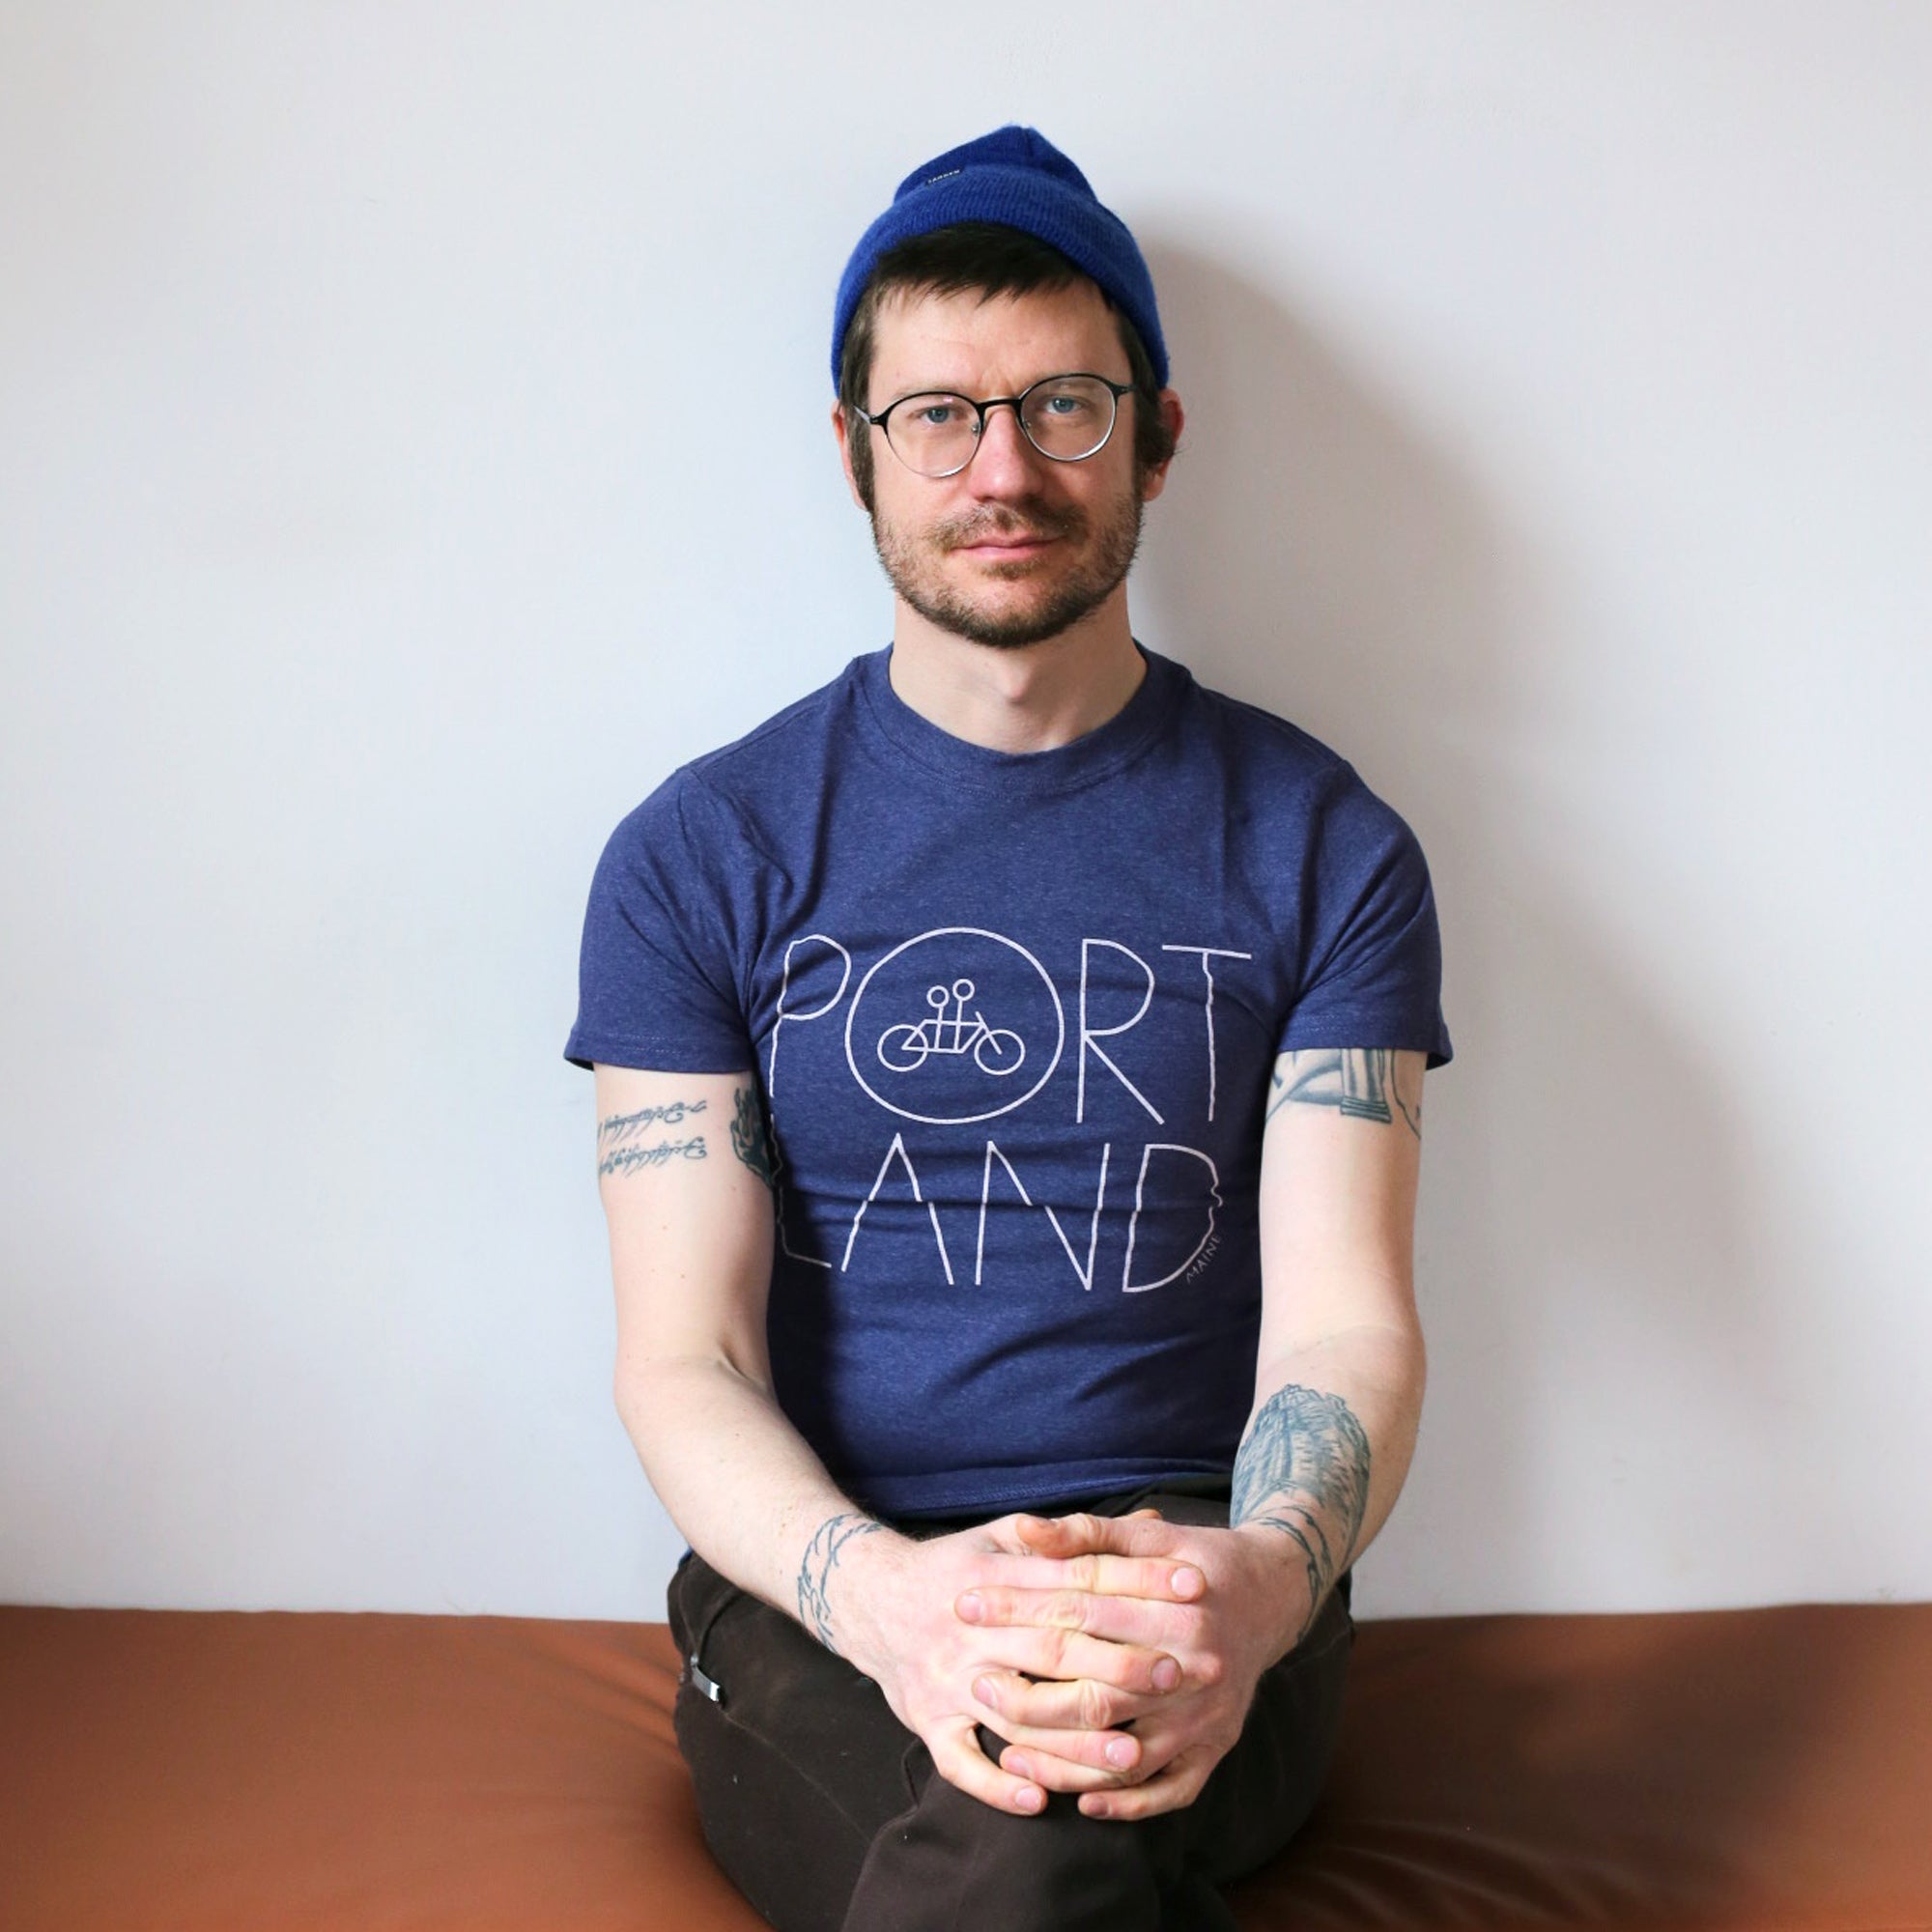 A man wearing a blue beanie and a Recycled Portland Tee from Tandem Coffee Roasters sits cross-legged on a brown surface against a white wall, looking at the camera.